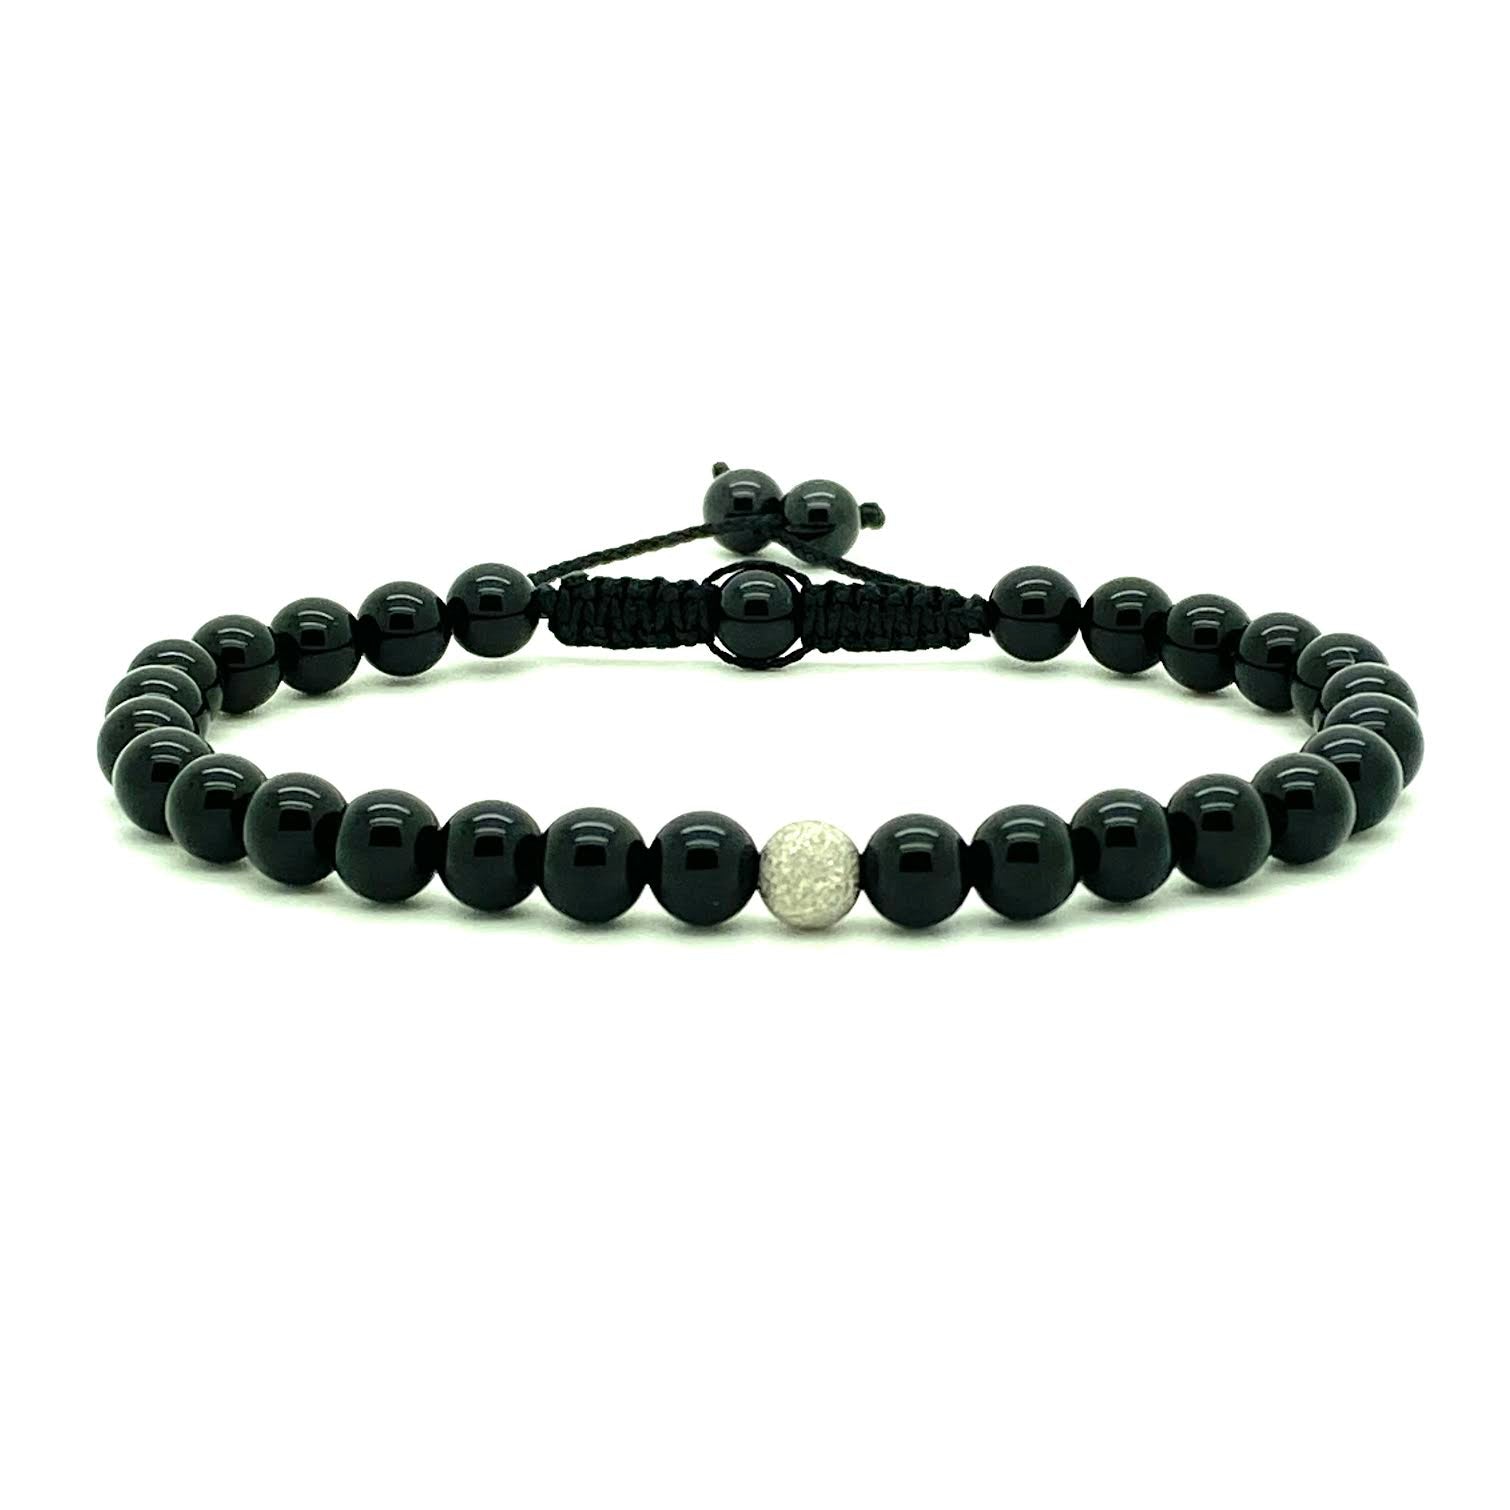 Sophisticated black onyx beads accented with one stardust white gold bead. Hand knotted adjustable cord for a perfect fit. Made by WristBend